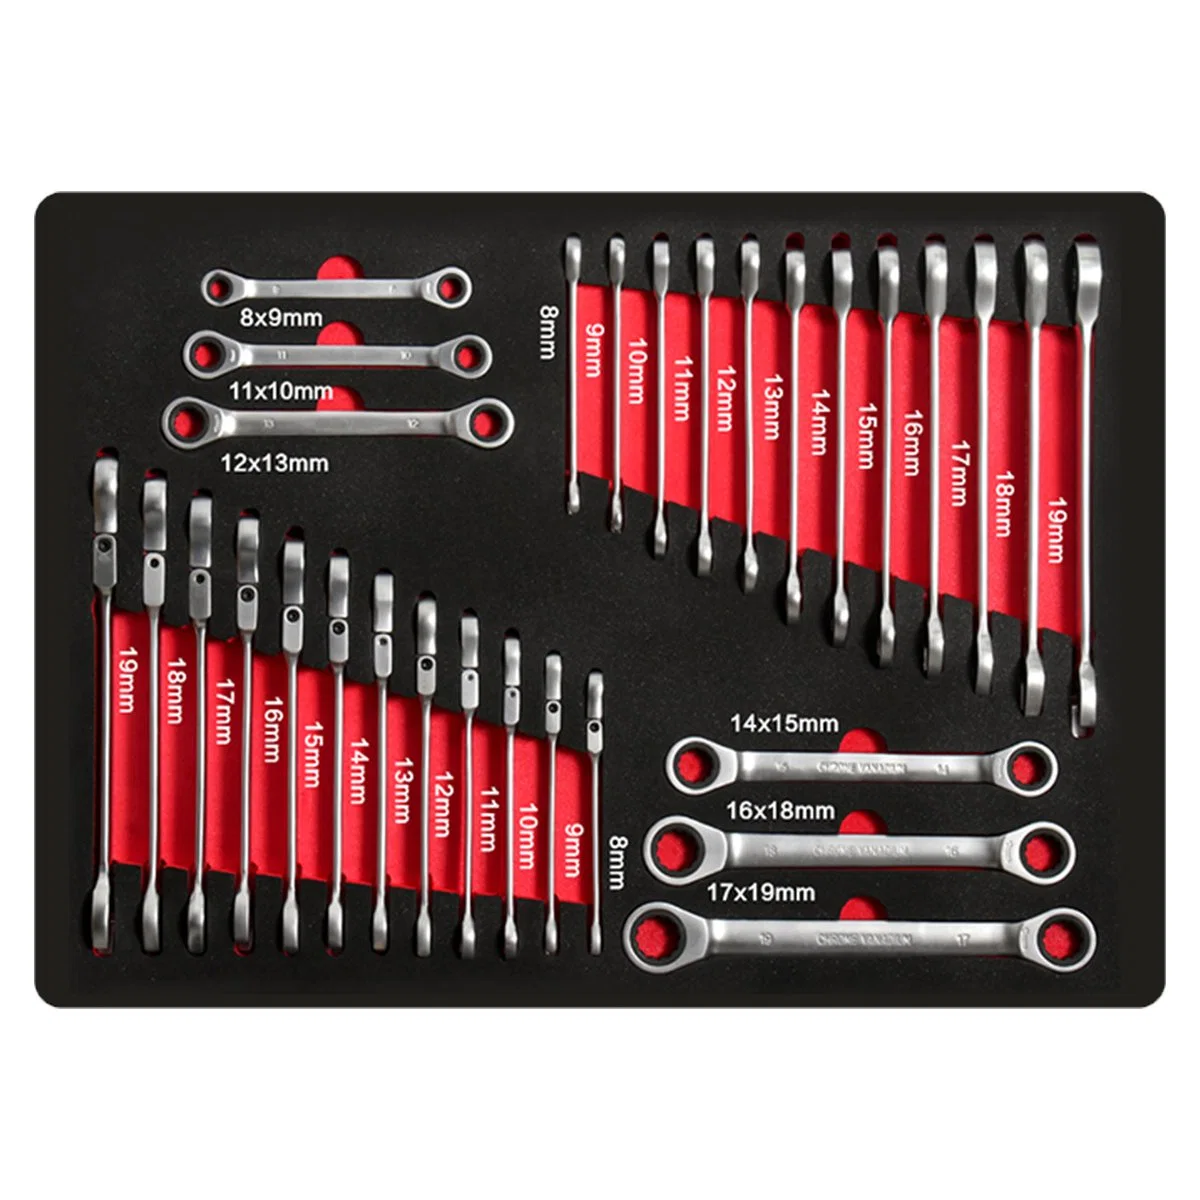 Goldenline 30 PCS Hand Tool Set with Flexible Combination Ratchet Wrench